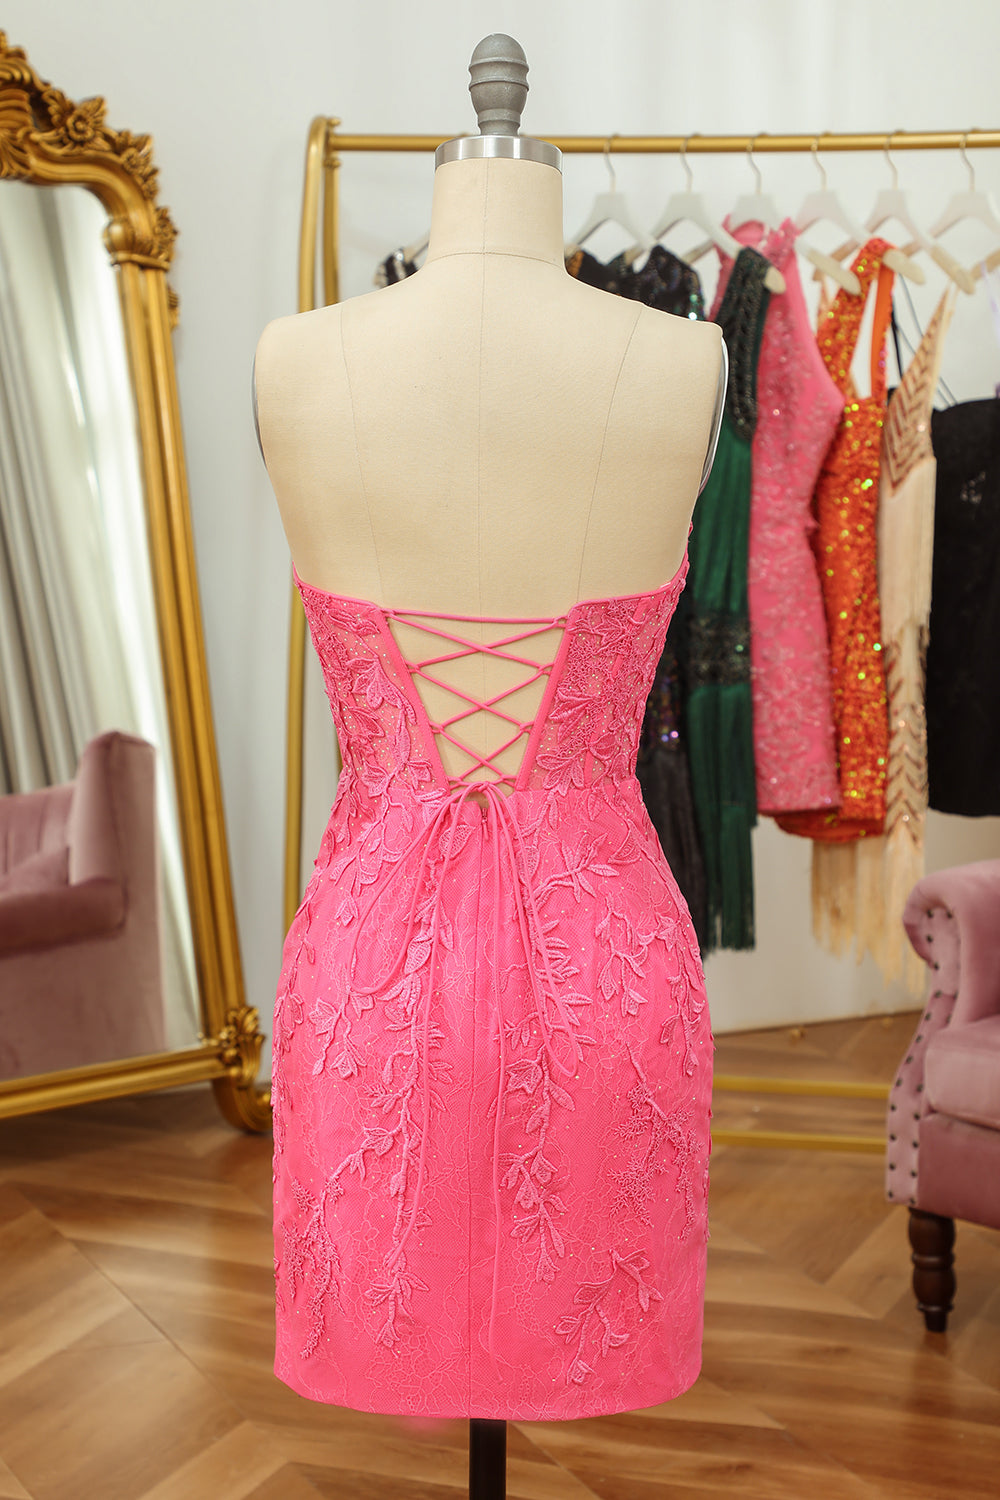 dressimeStrapless Sweetheart Short Pink Bodycon Cute Mini Lace Applique Homecoming Dress 